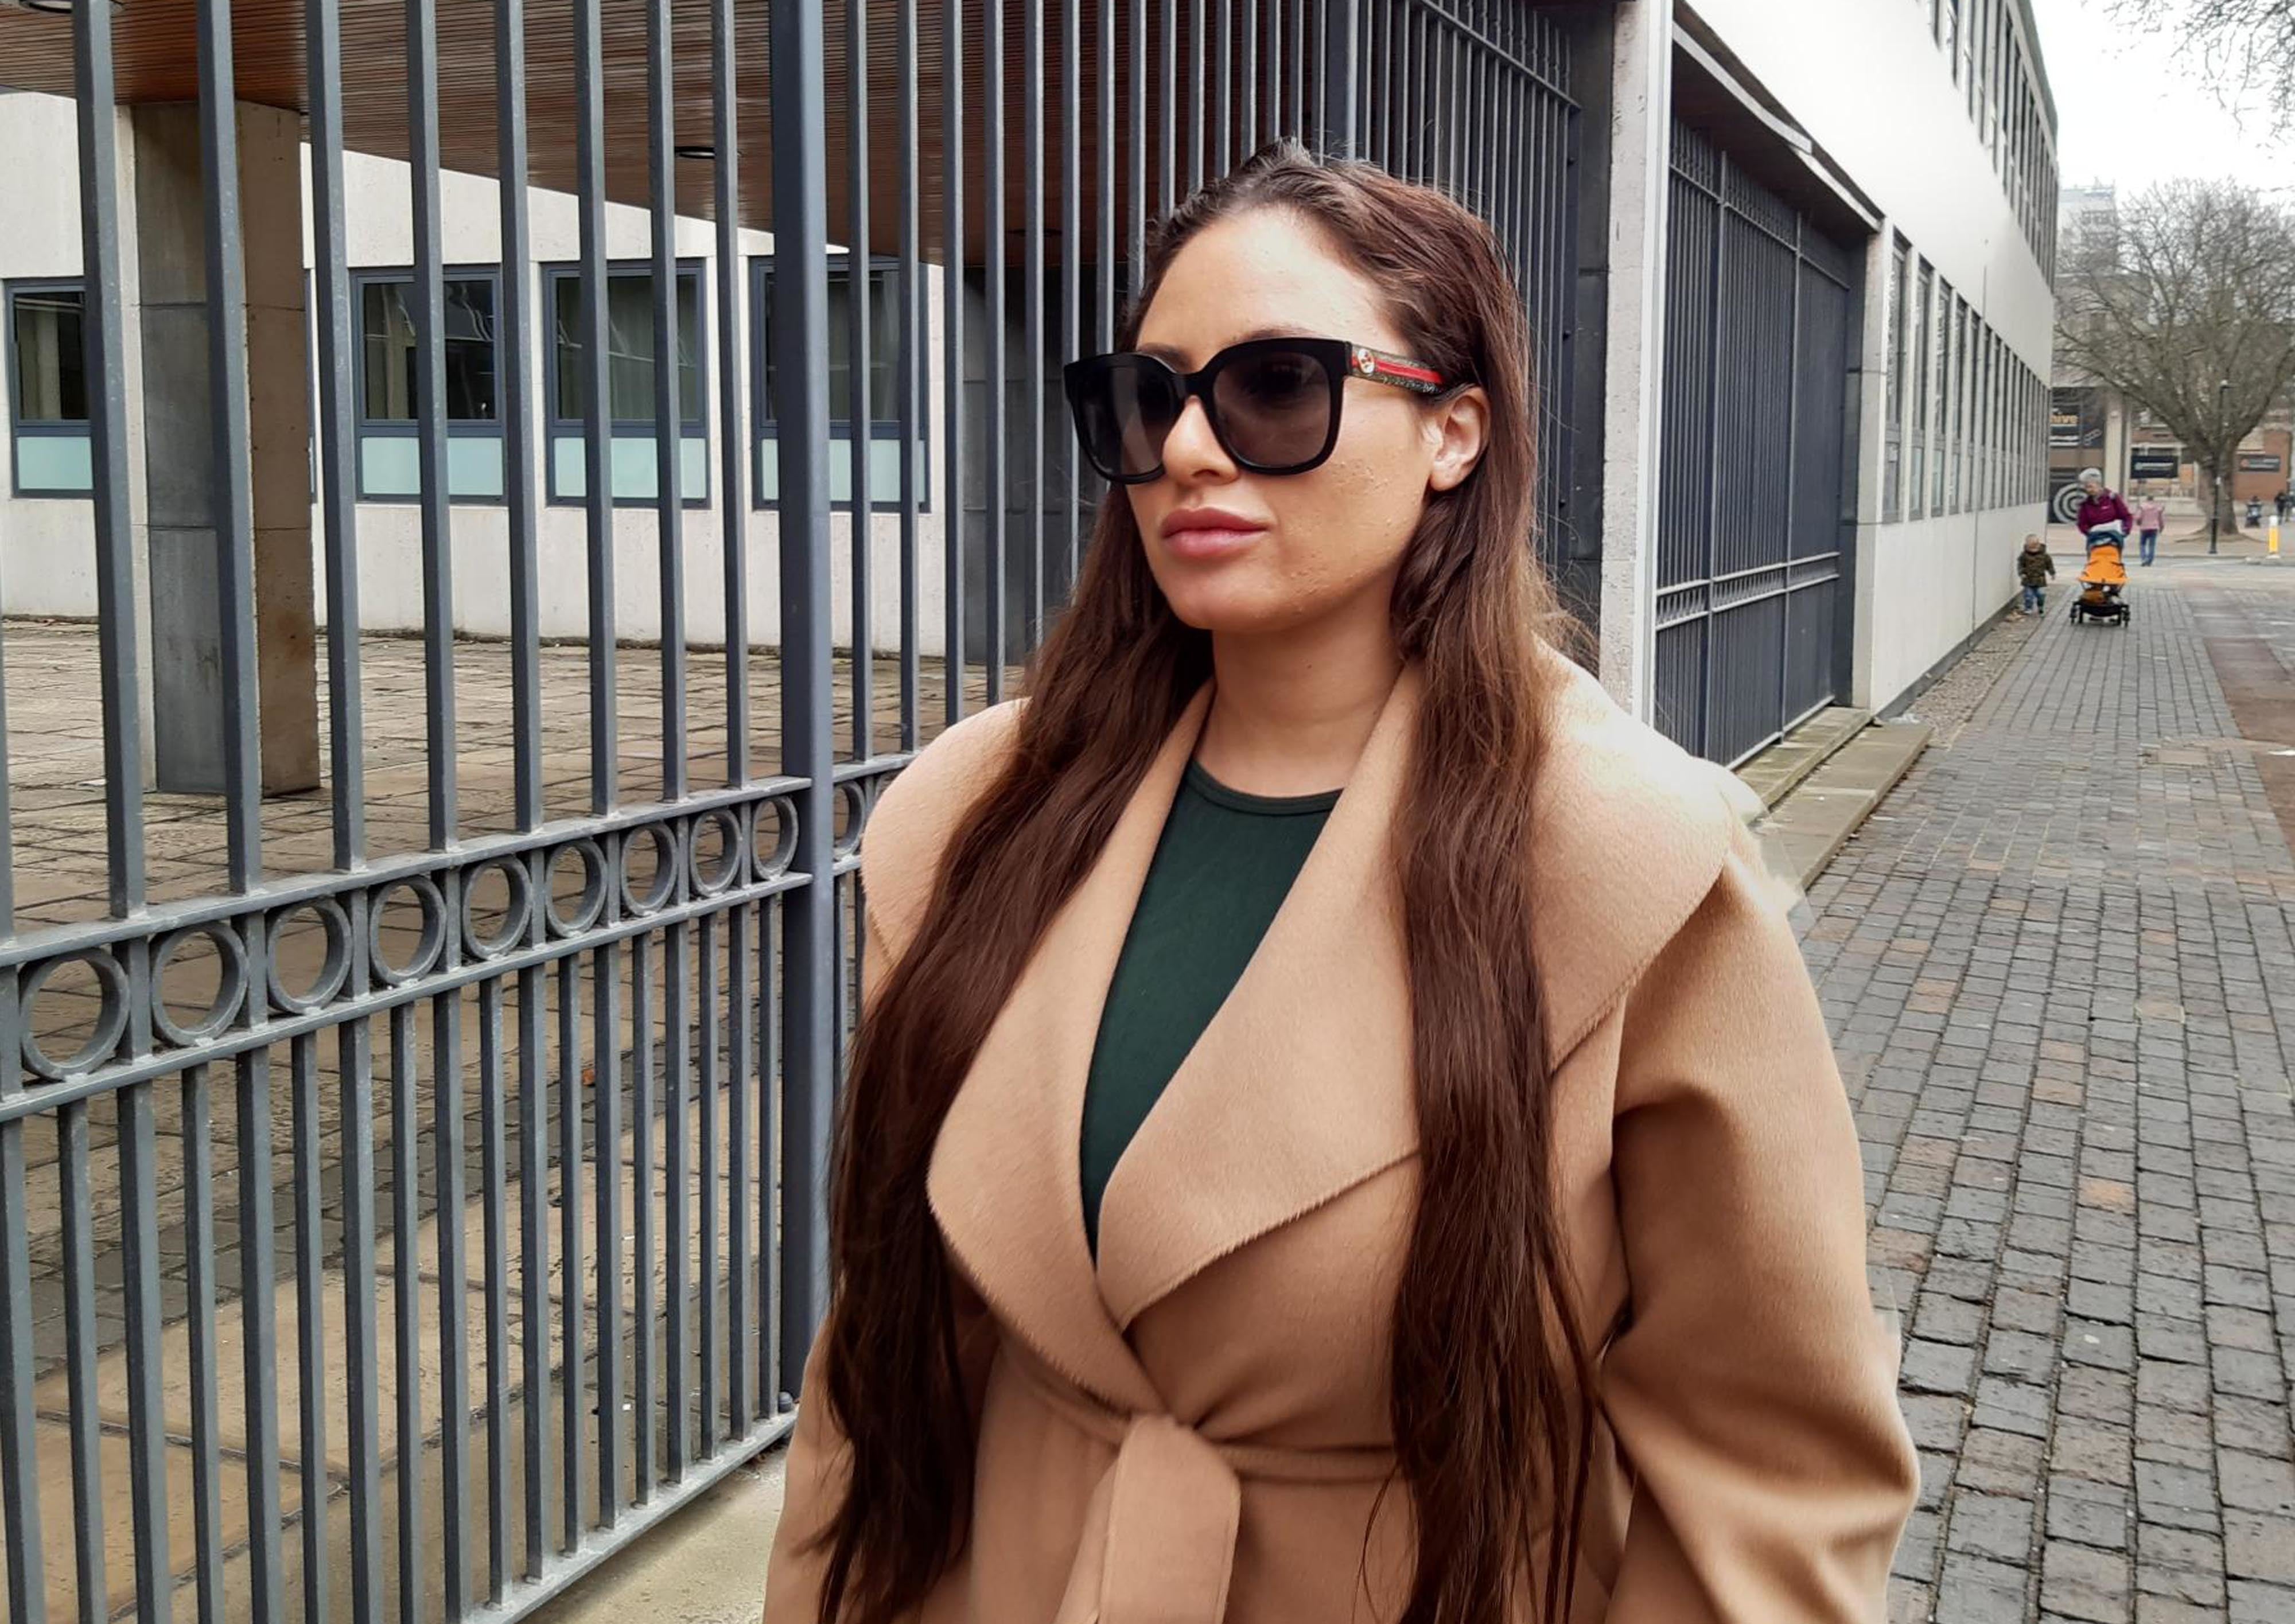 Sherrilyn Speid outside Southend Magistrates’ Court on Monday